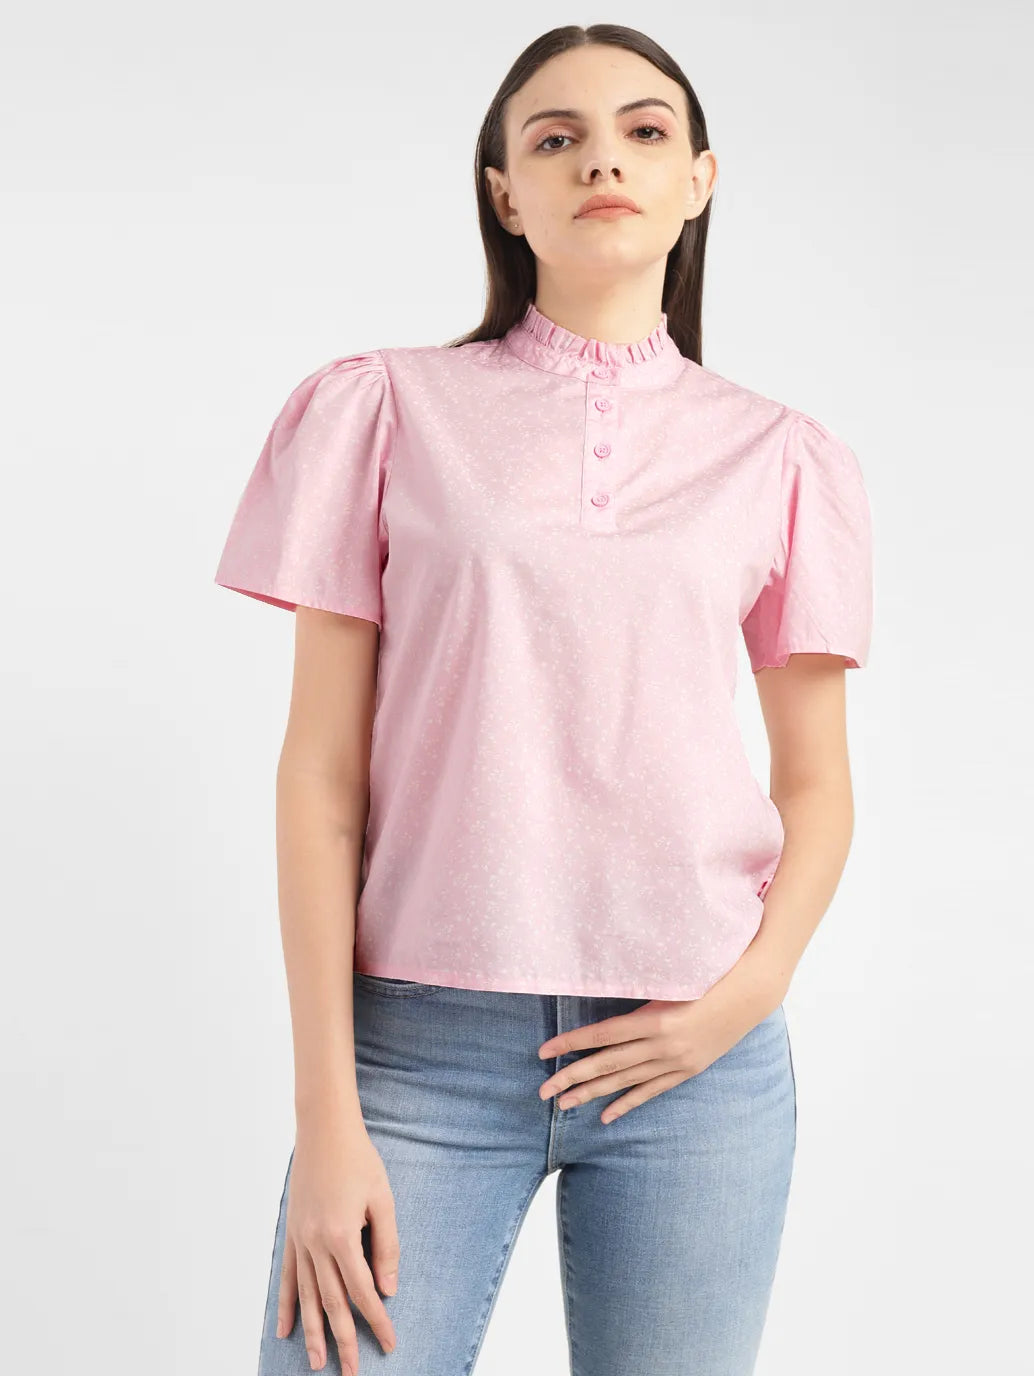 Women's Self Pink Band Neck Top